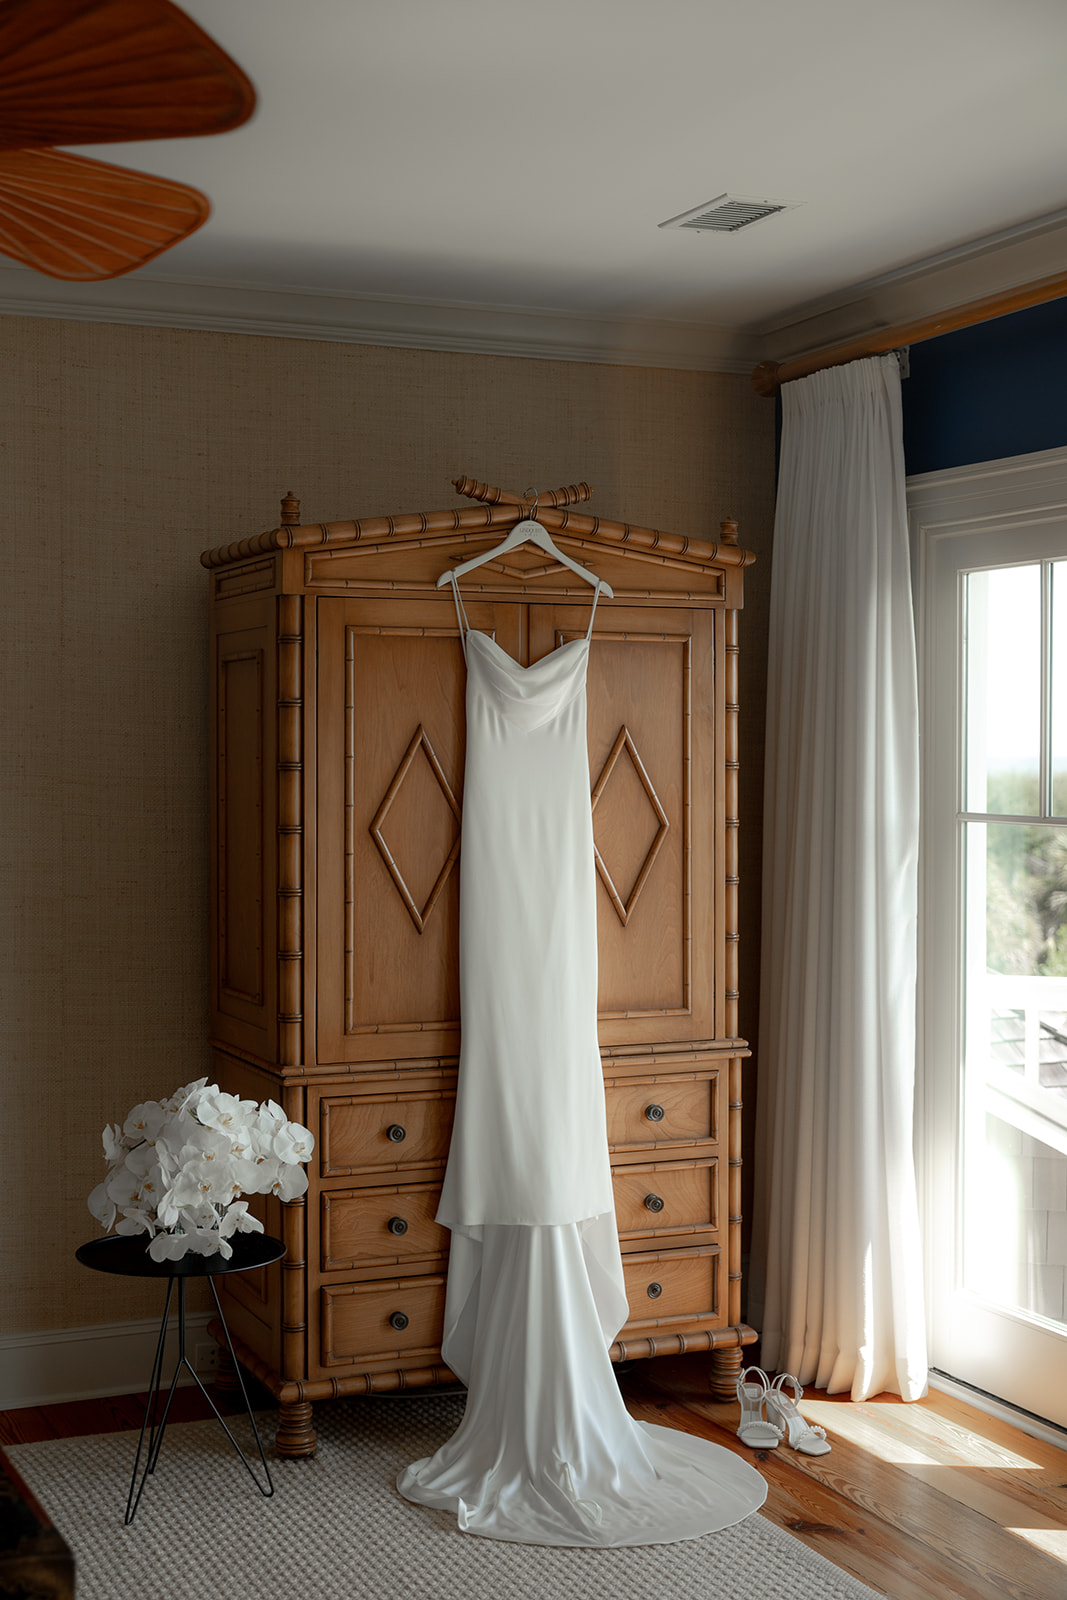 Getting ready for Kiawah Ocean Course wedding. Wedding dress hung at wooden closet with bridal bouquet next to it.